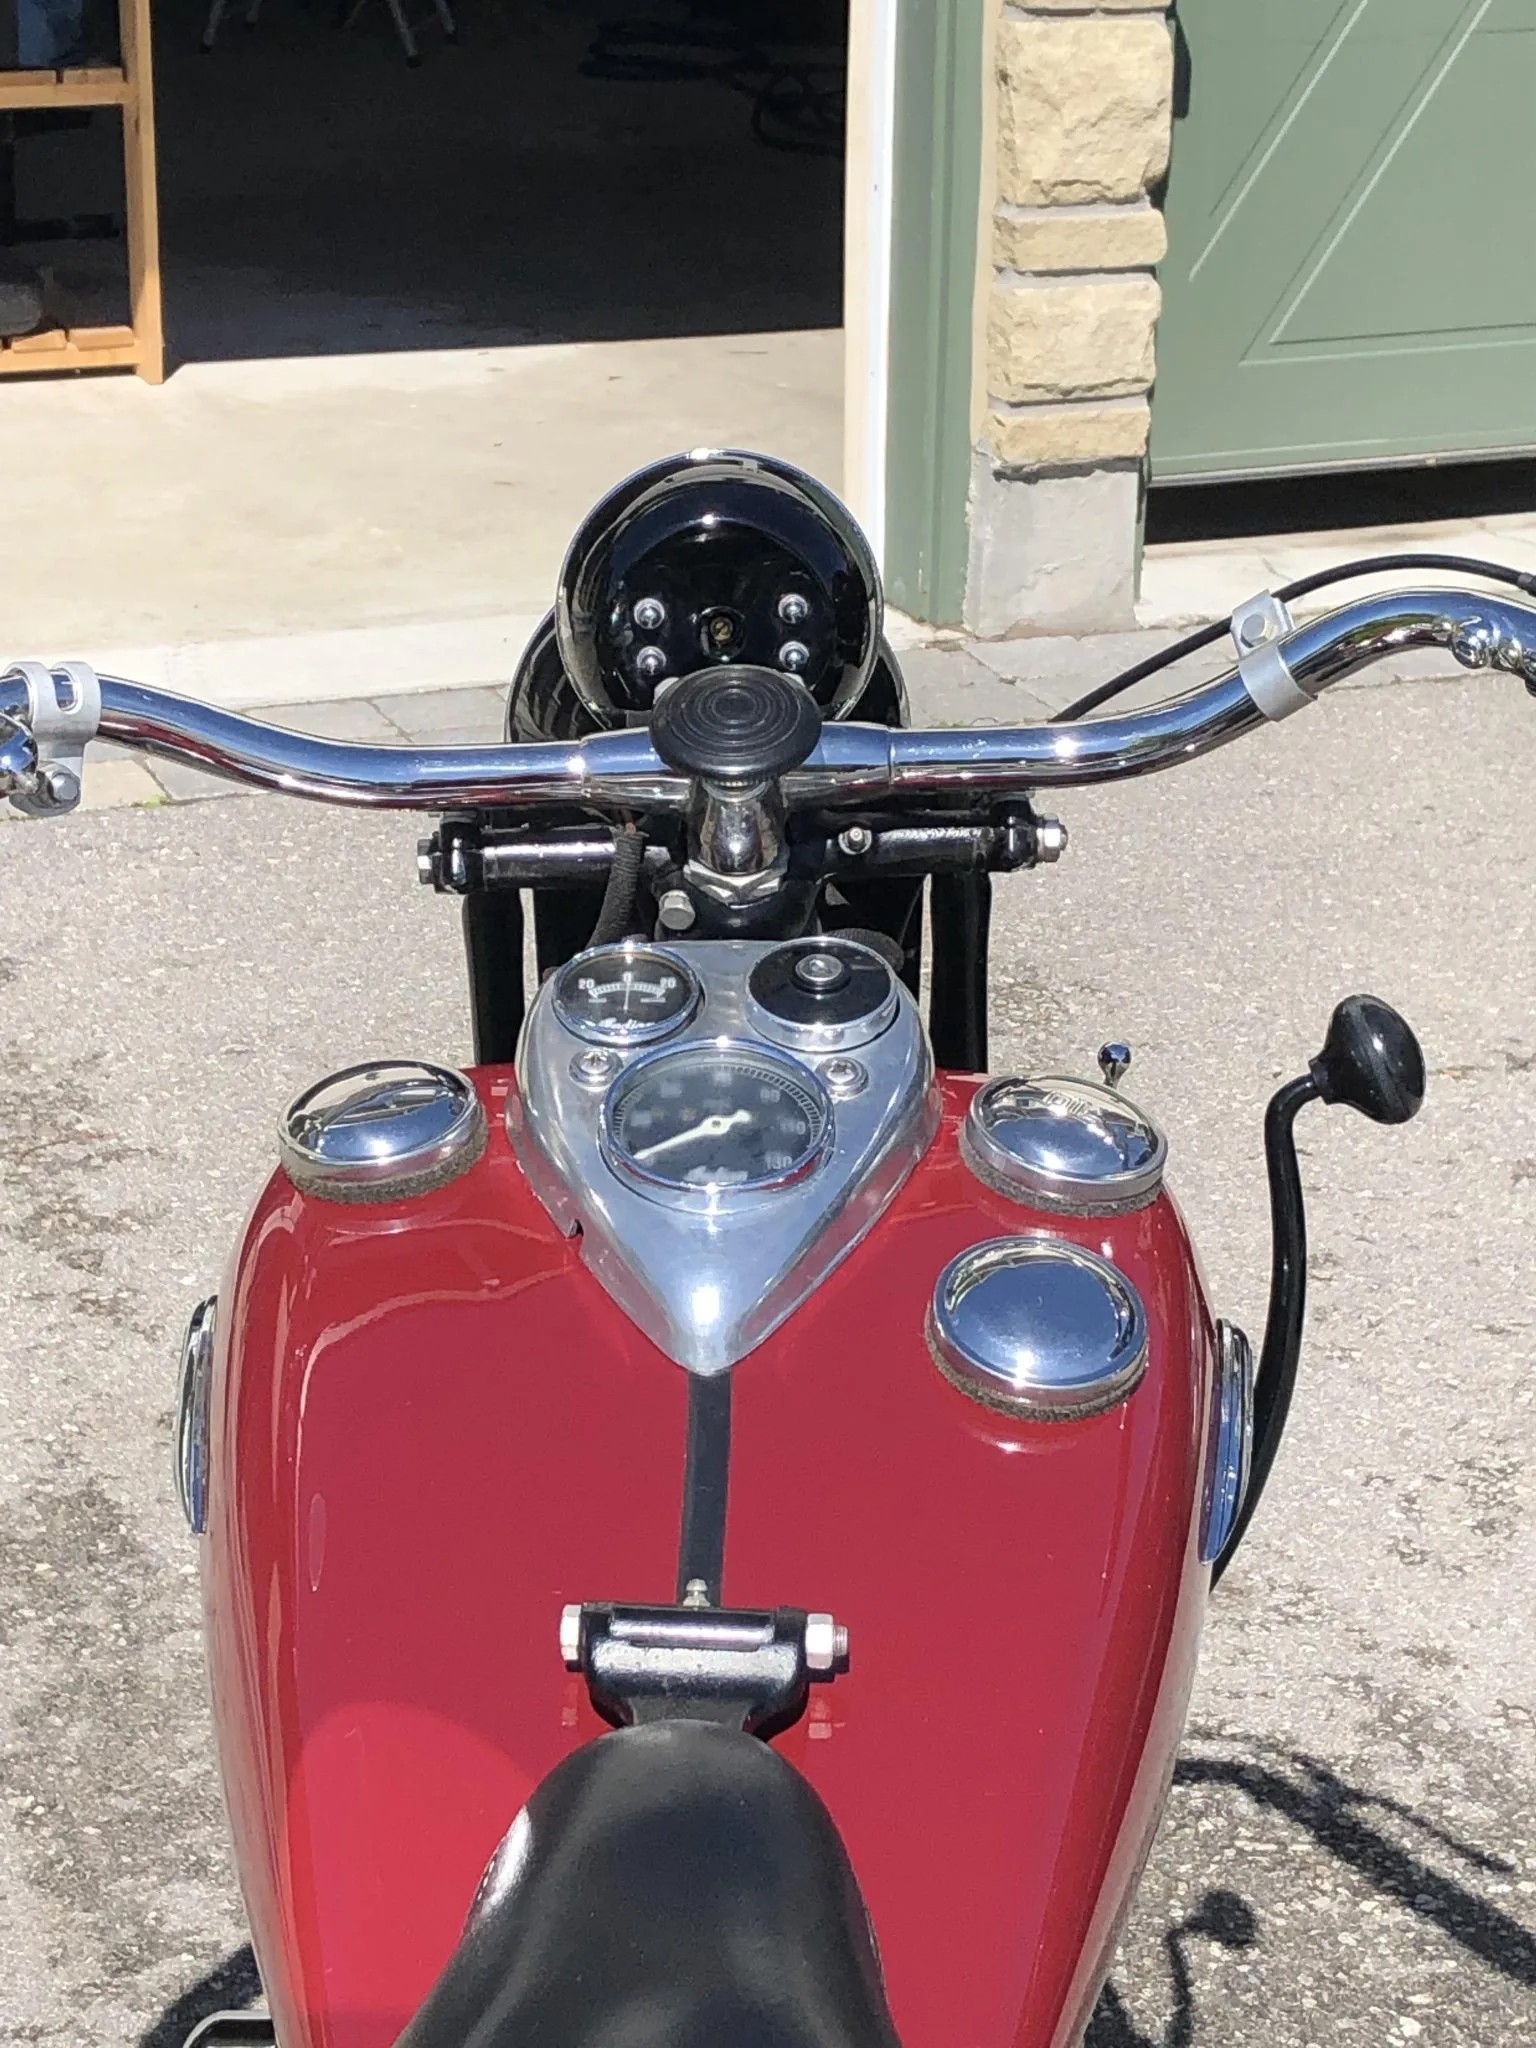 Numbers-Matching 1940 Indian Sport Scout Looks Rather Sprightly After a ...